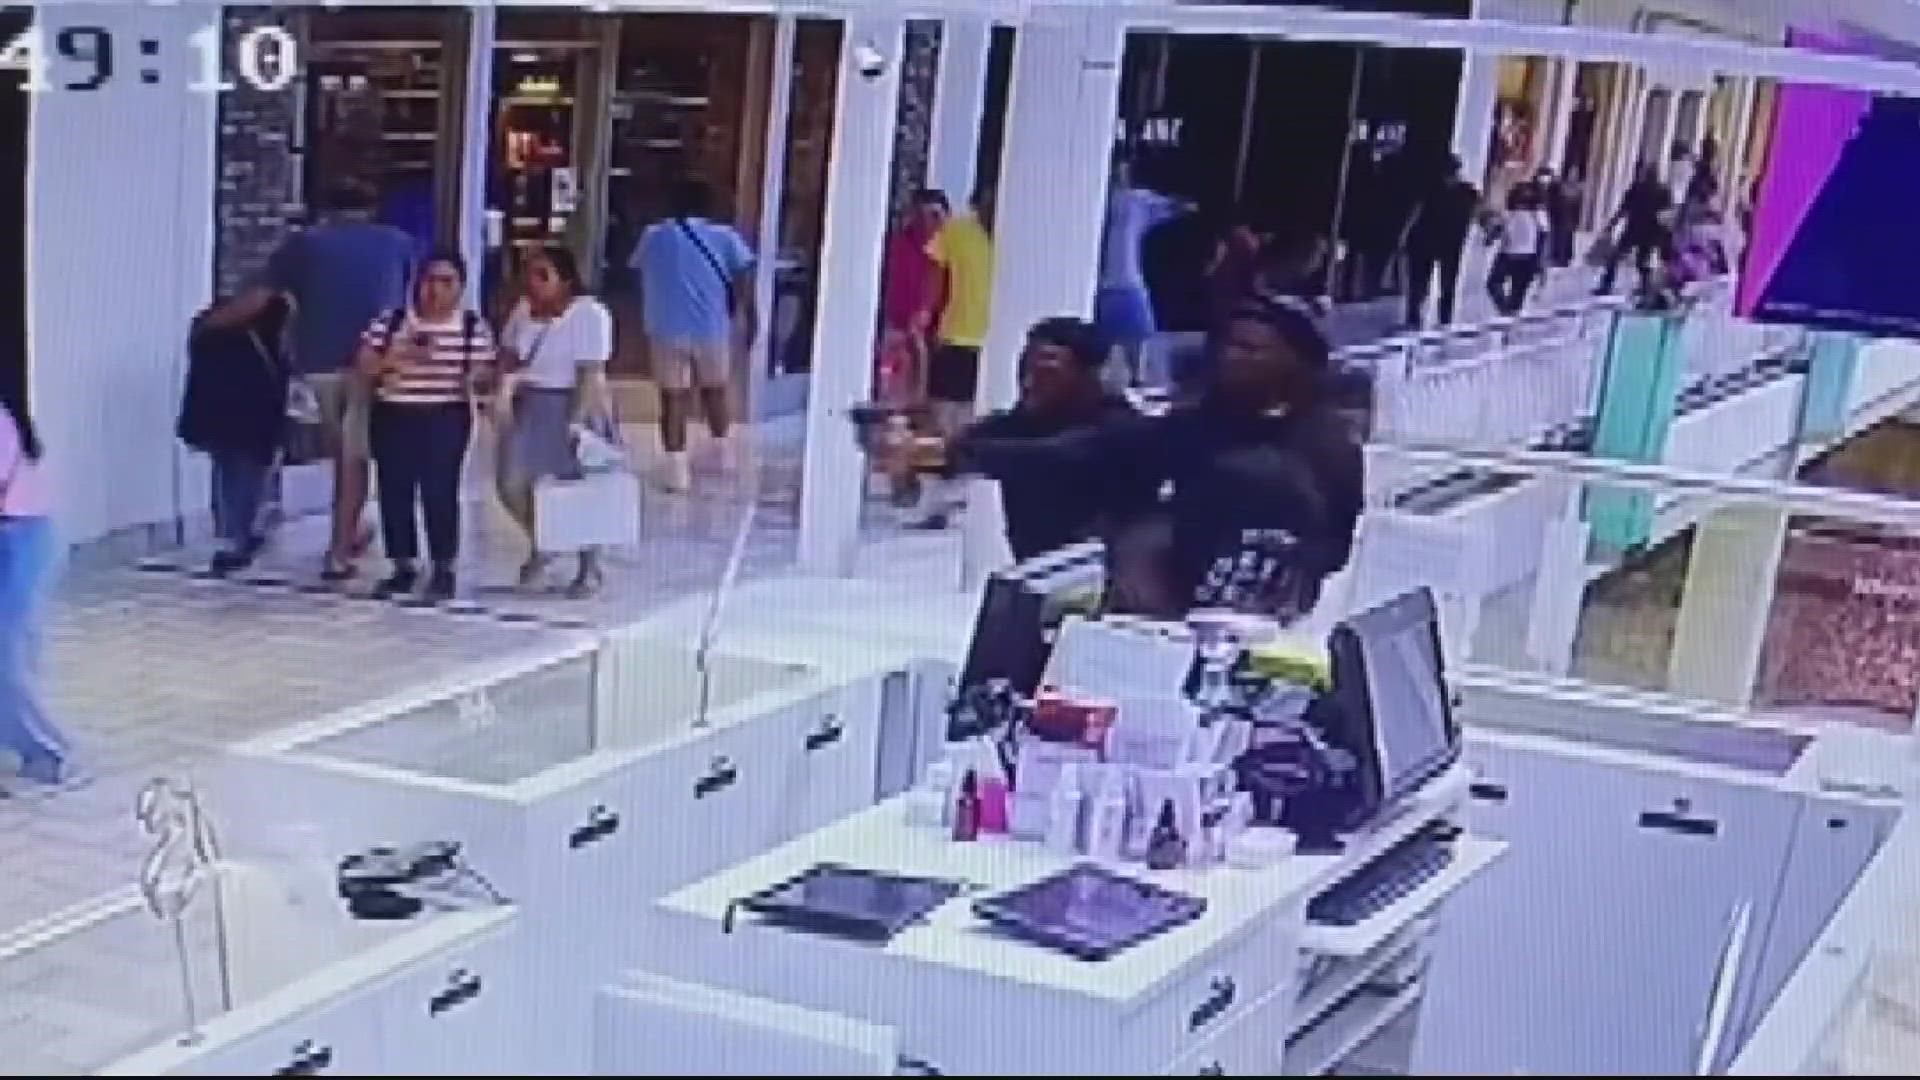 DC man faces up to 33 years behind bars after plea in Tysons mall shooting  that sparked panic - WTOP News